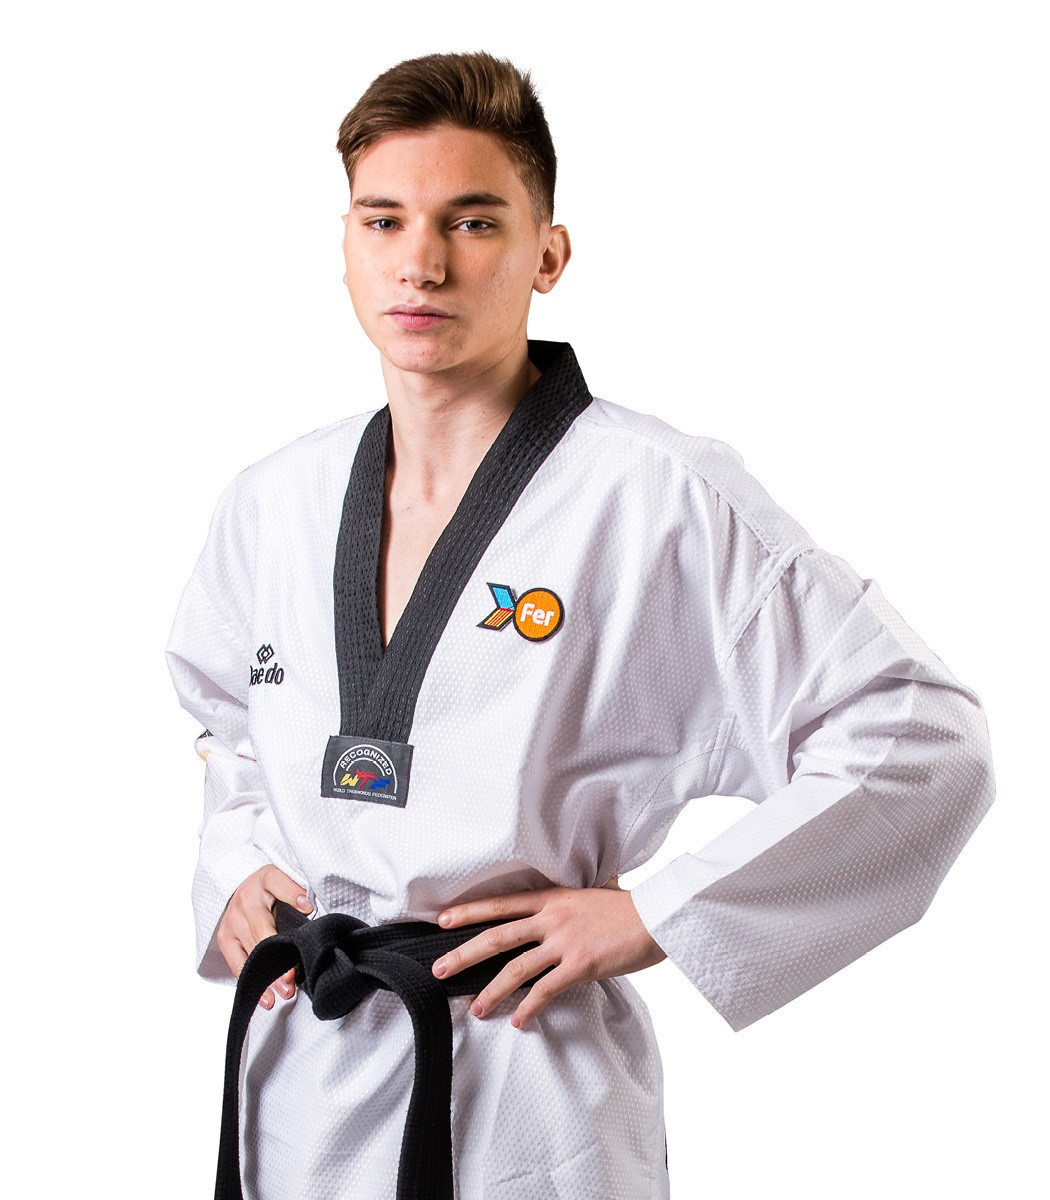 Hugo Arillo Vazquez claimed four youth medals last season including gold at the Spanish Open ©FER Project